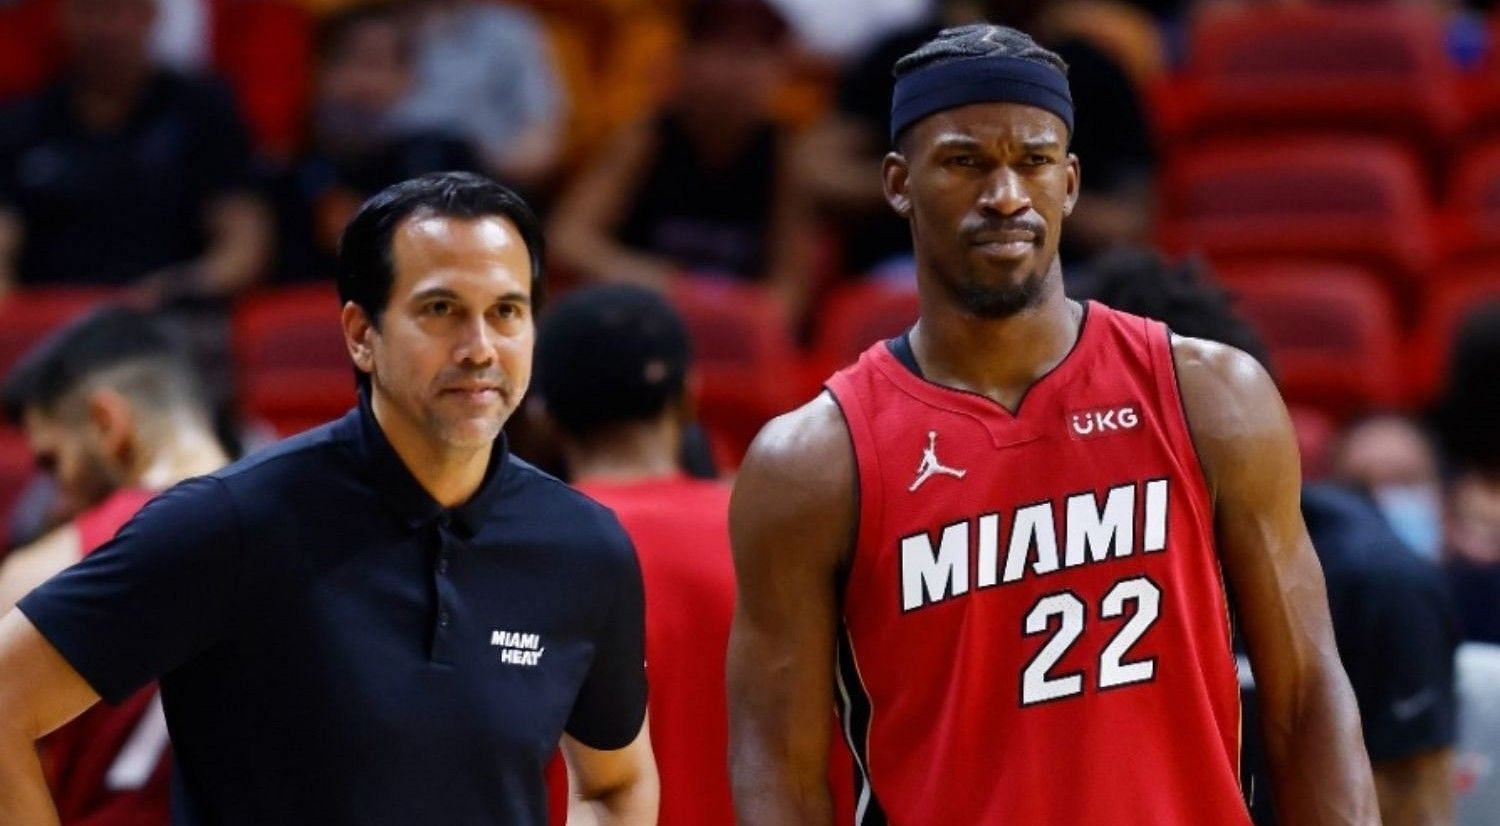 Miami Heat coach Erik Spoelstra raved about their star forward Jimmy Butler after he hit the game-winning shot against the Chicago Bulls on Saturday.